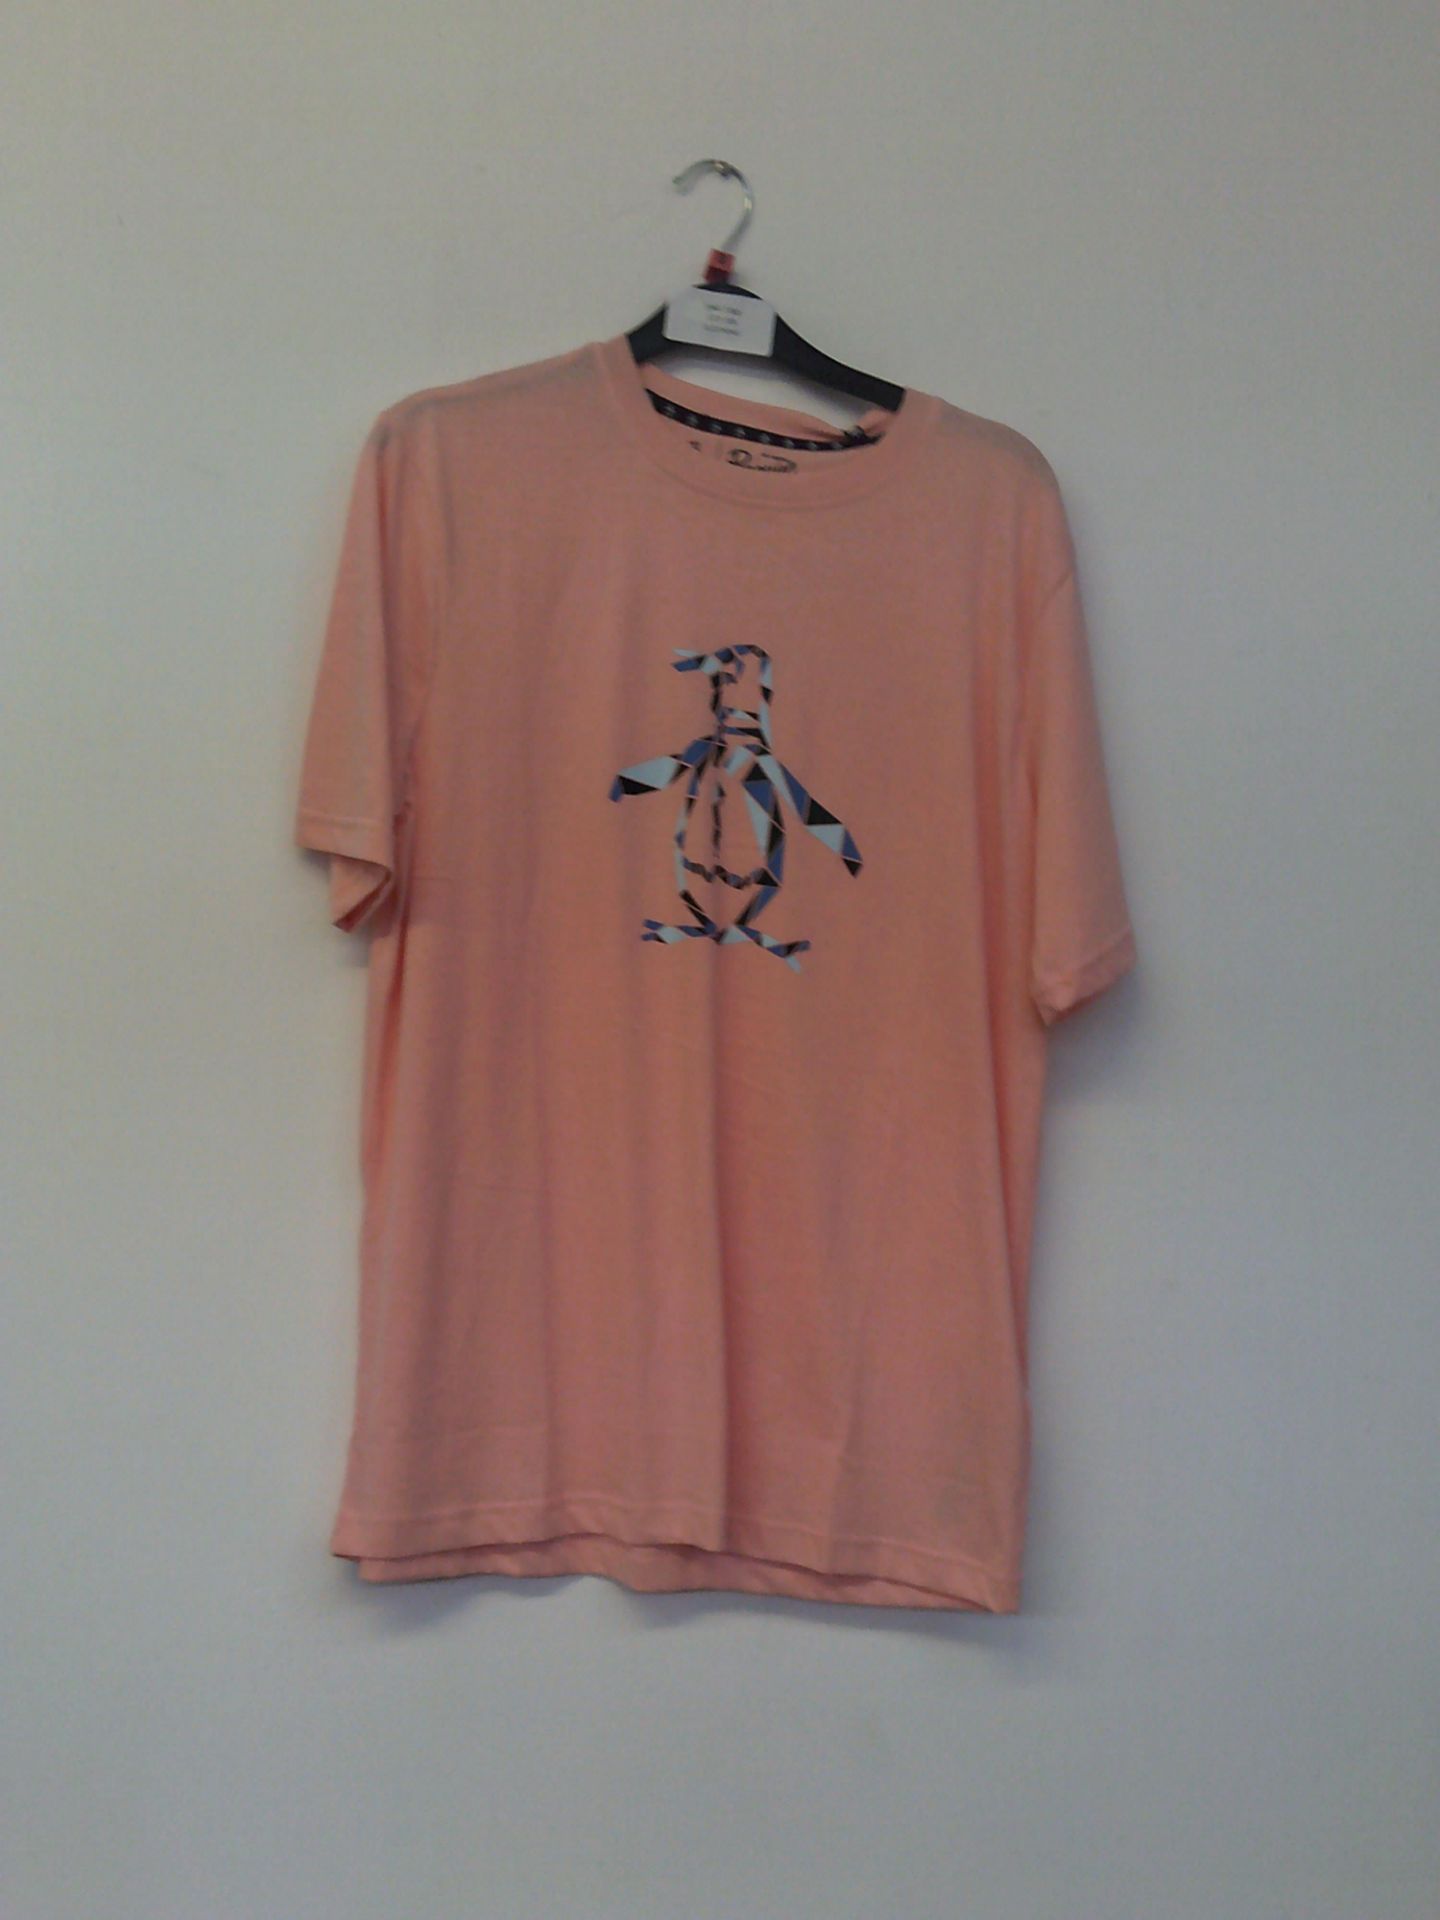 Penguin Mens Pink T Shirt Size Small